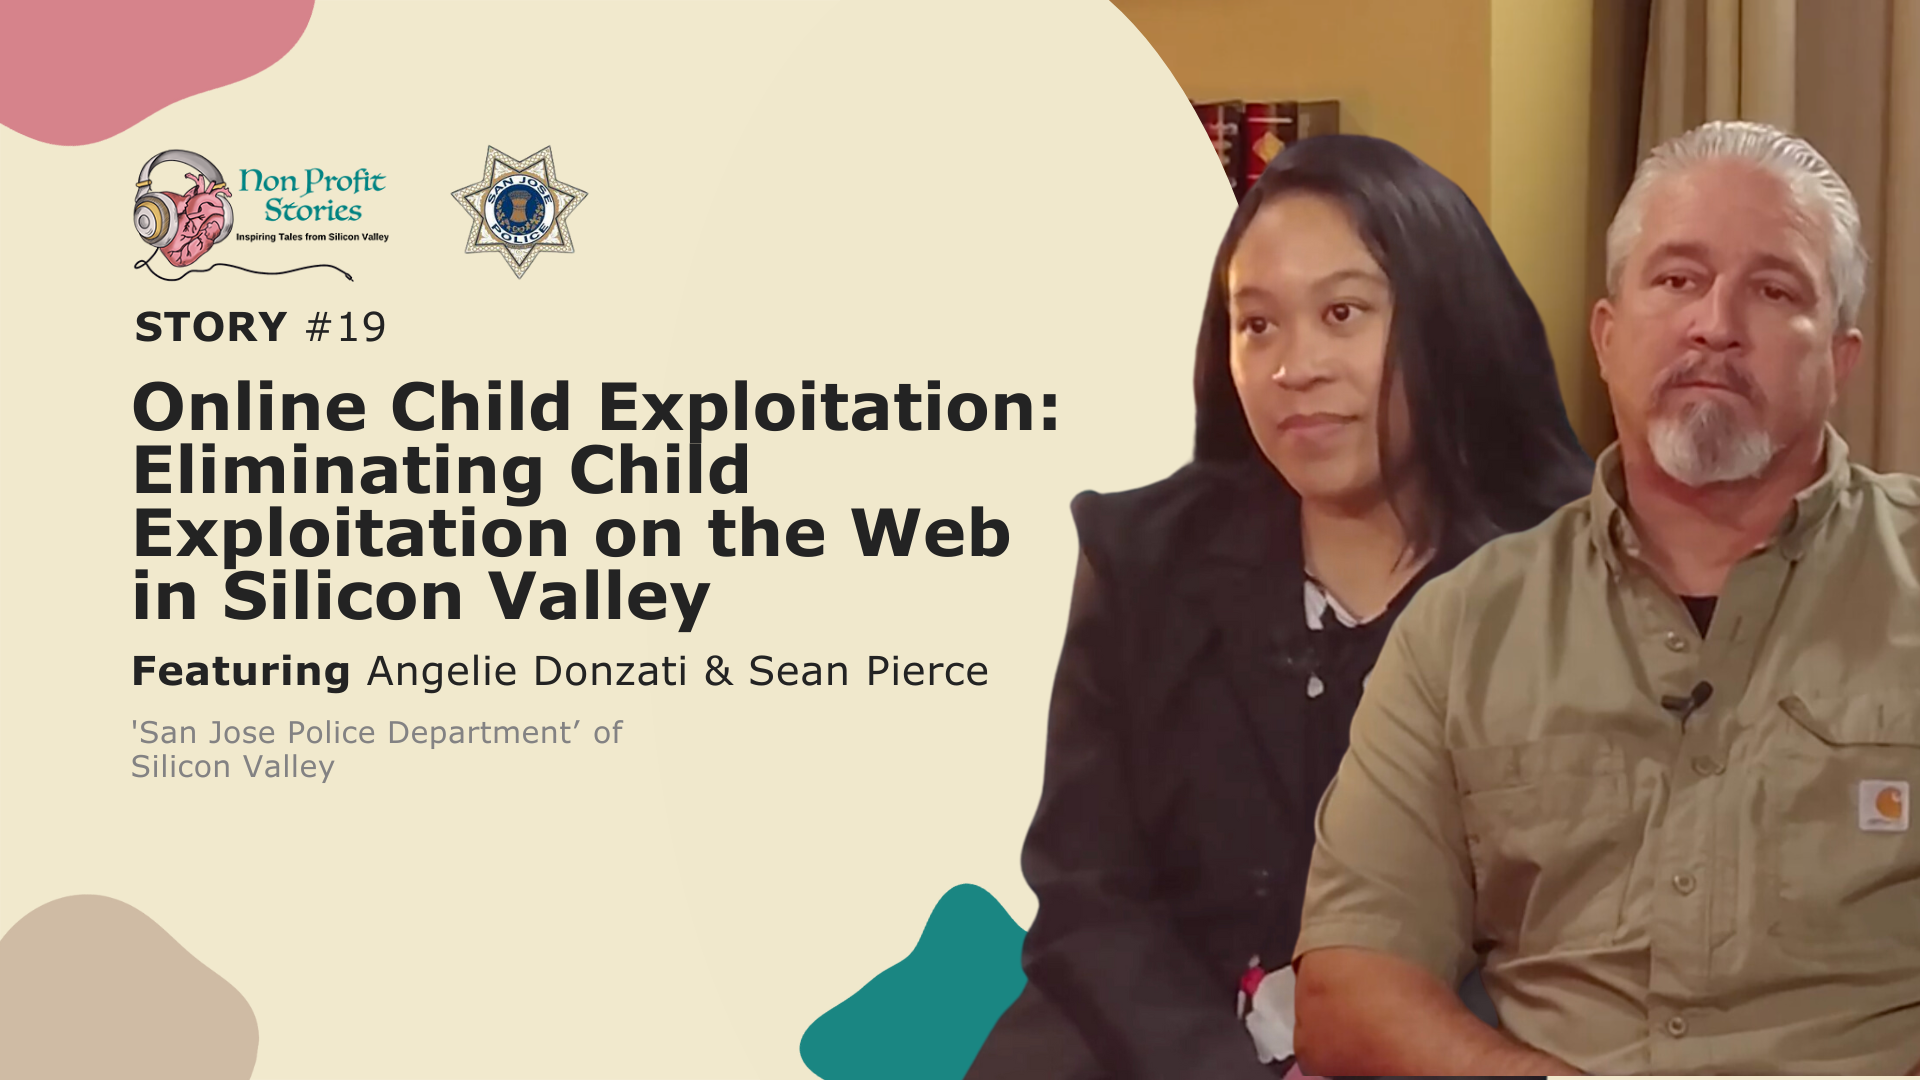 Online Child Exploitation: Eliminating Child Exploitation on the Web in Silicon Valley